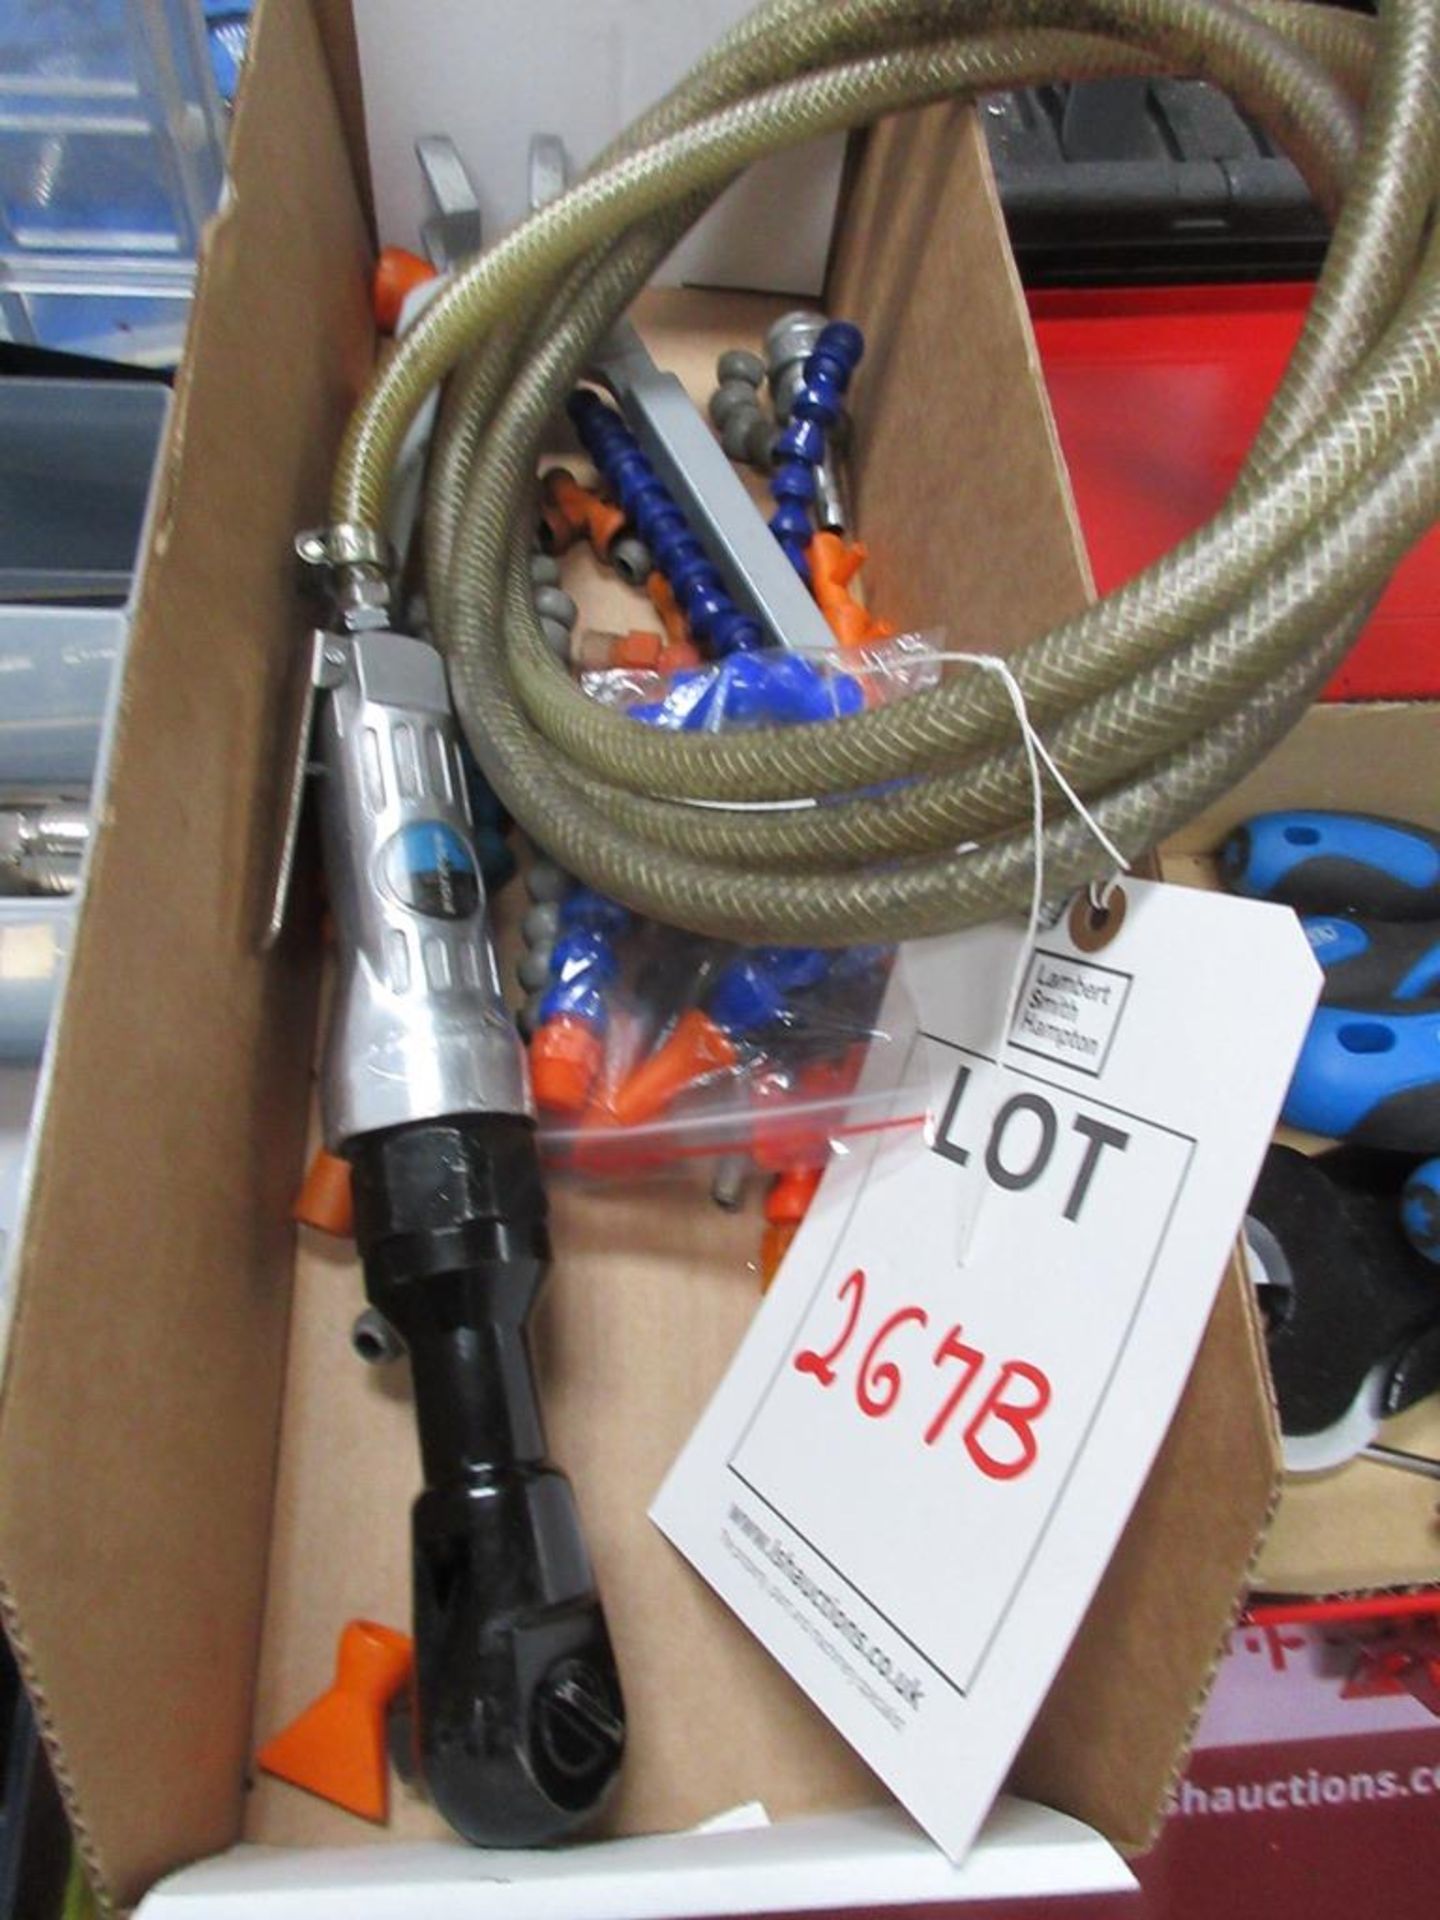 Toolzone Pneumatic wrench and assorted coolant pipe